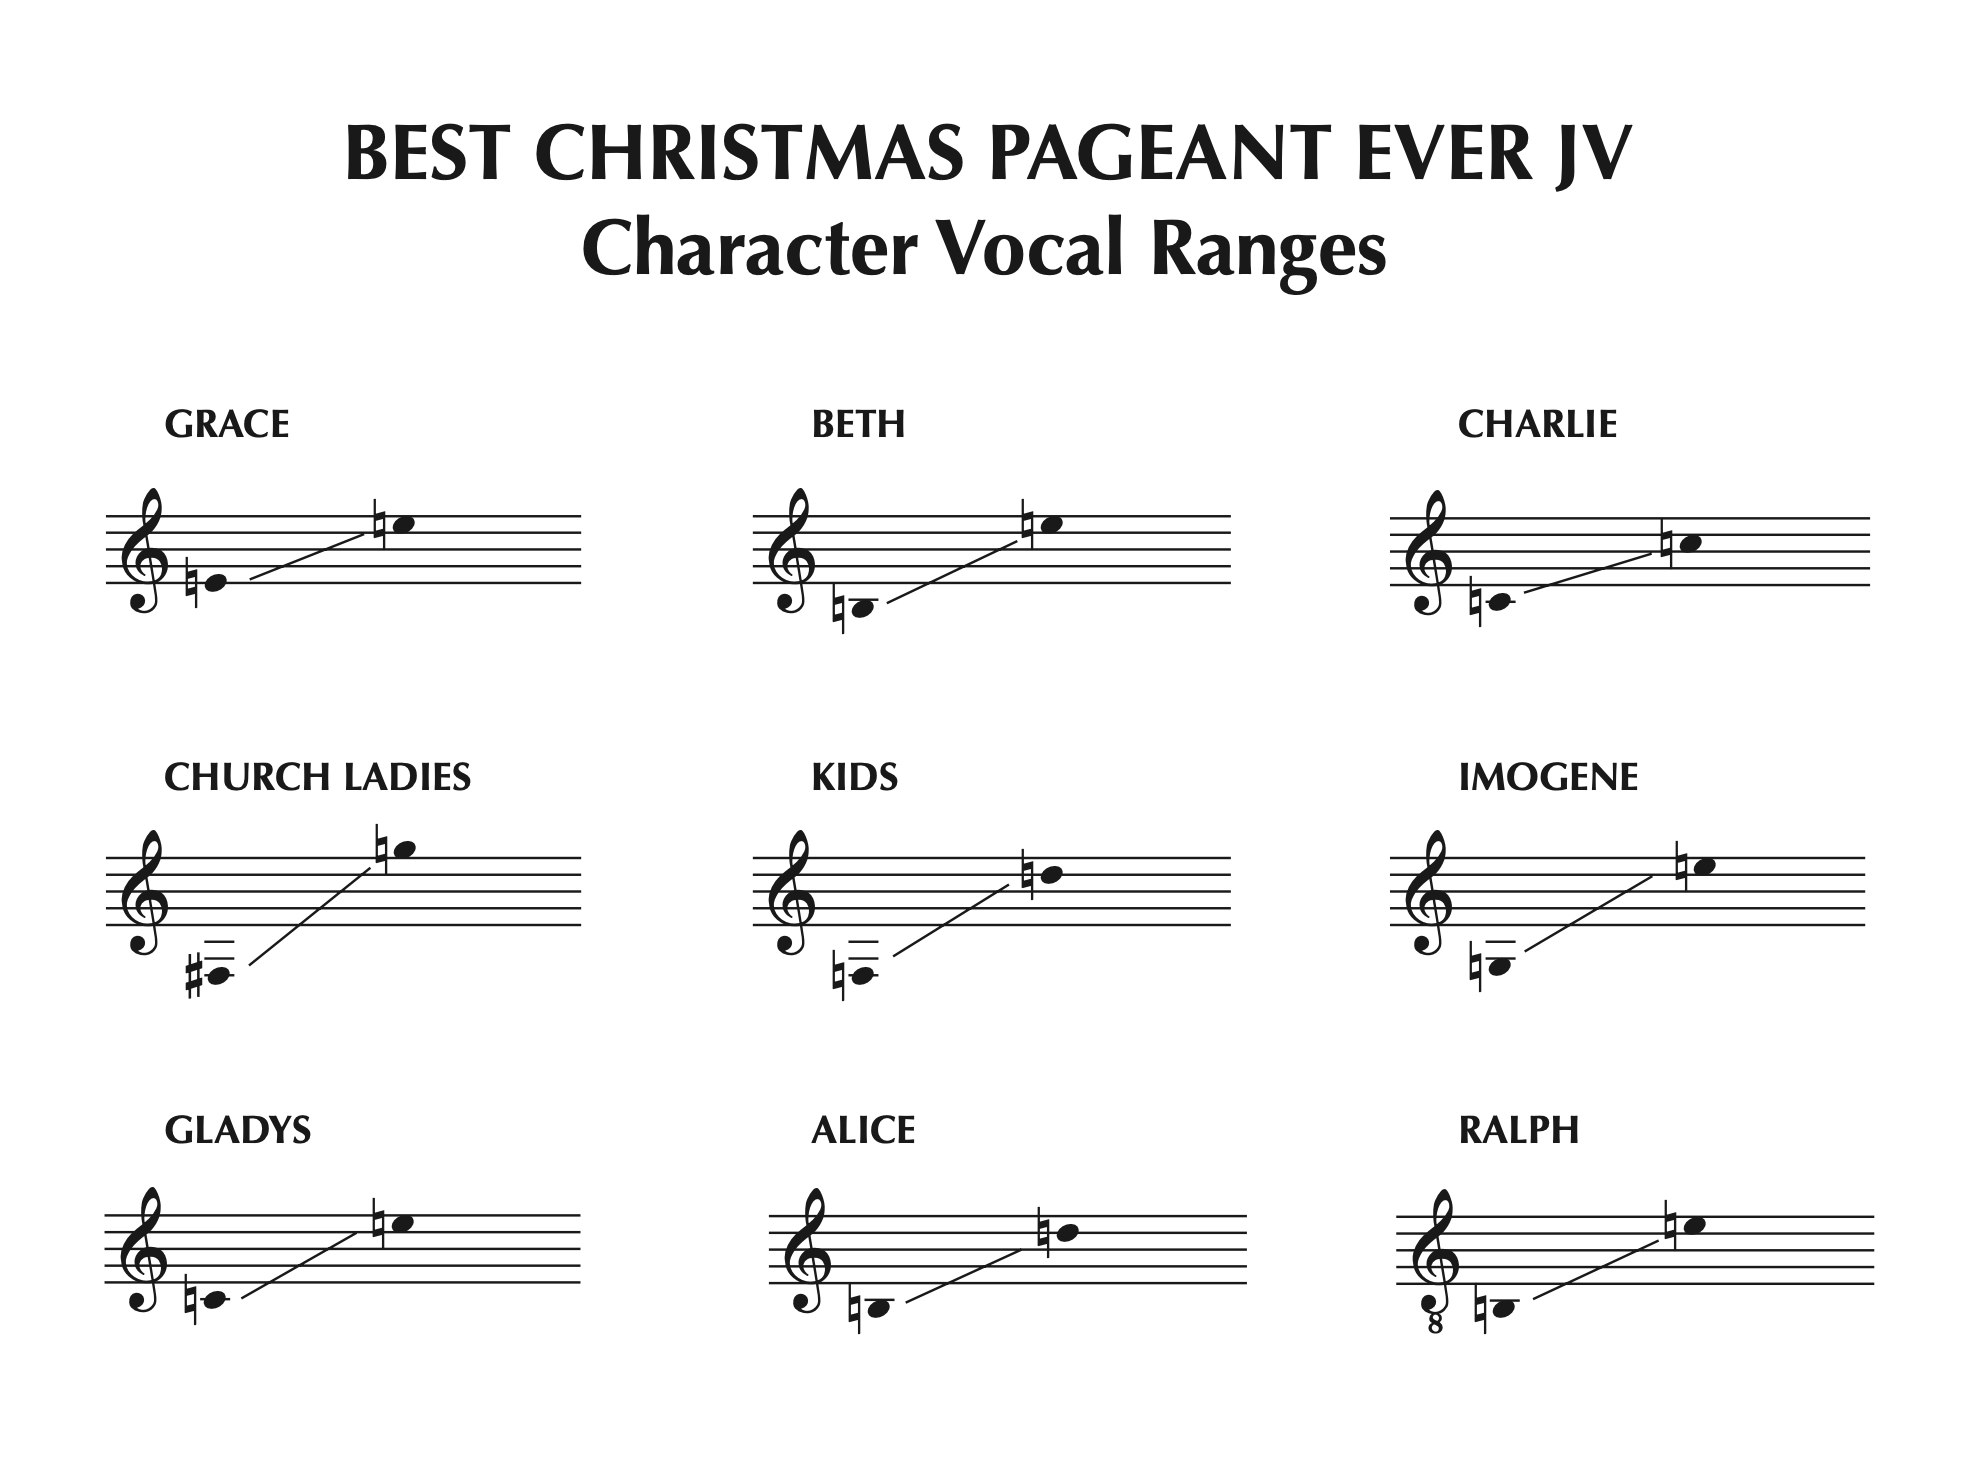 The Best Christmas Pageant Ever: The Musical — JV Vocal Ranges